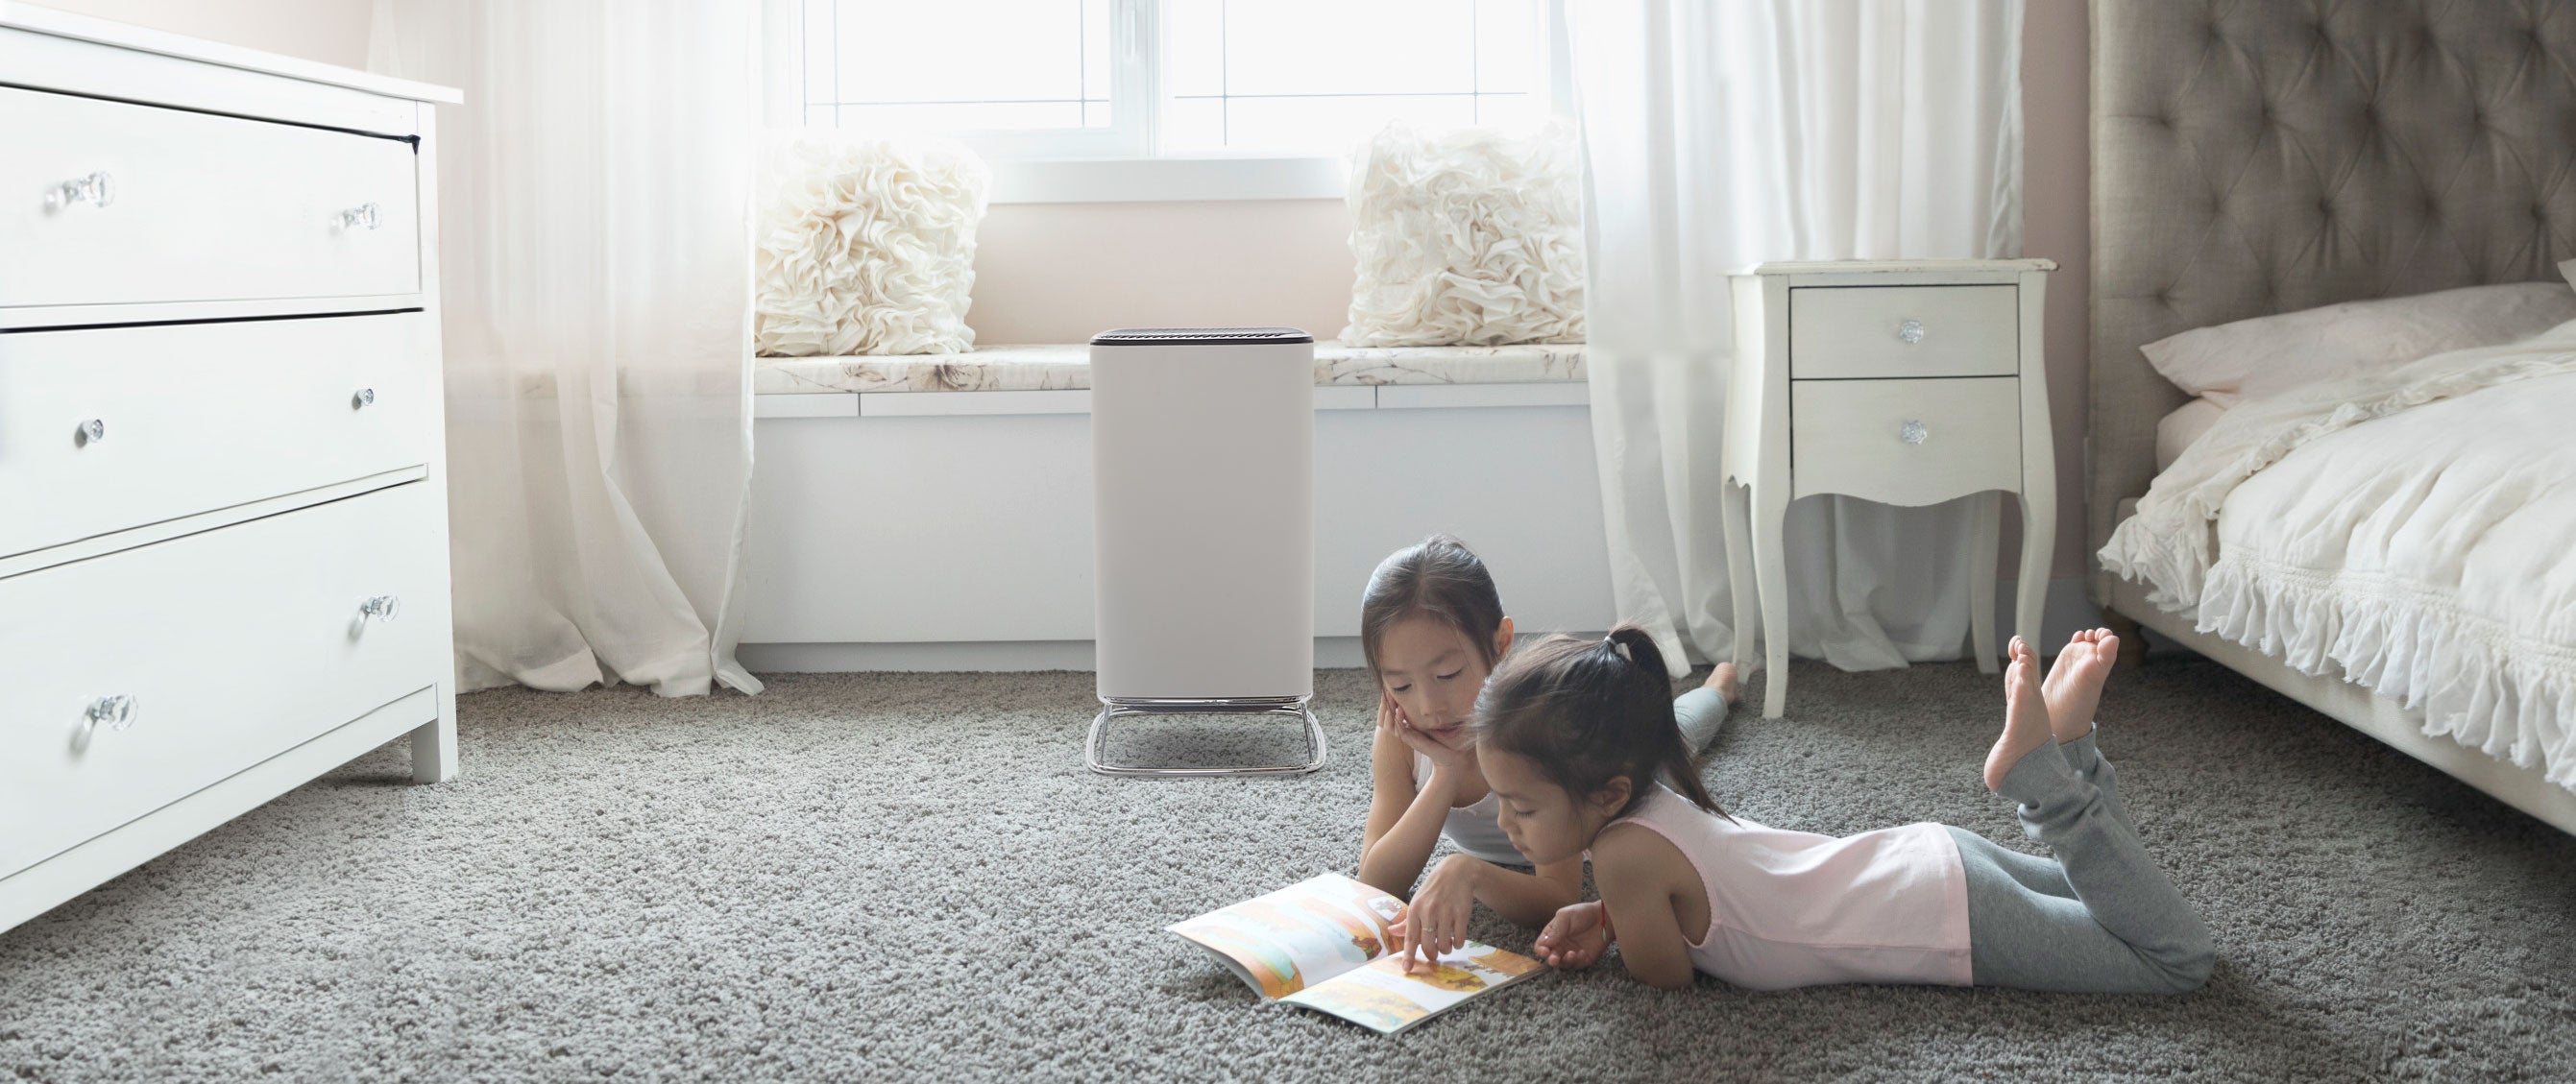 Brio_Two-Girls-Bedroom_JW_Buyers_Guide_Best_Room_Air_Purifier - Brio, the innovative air purifier